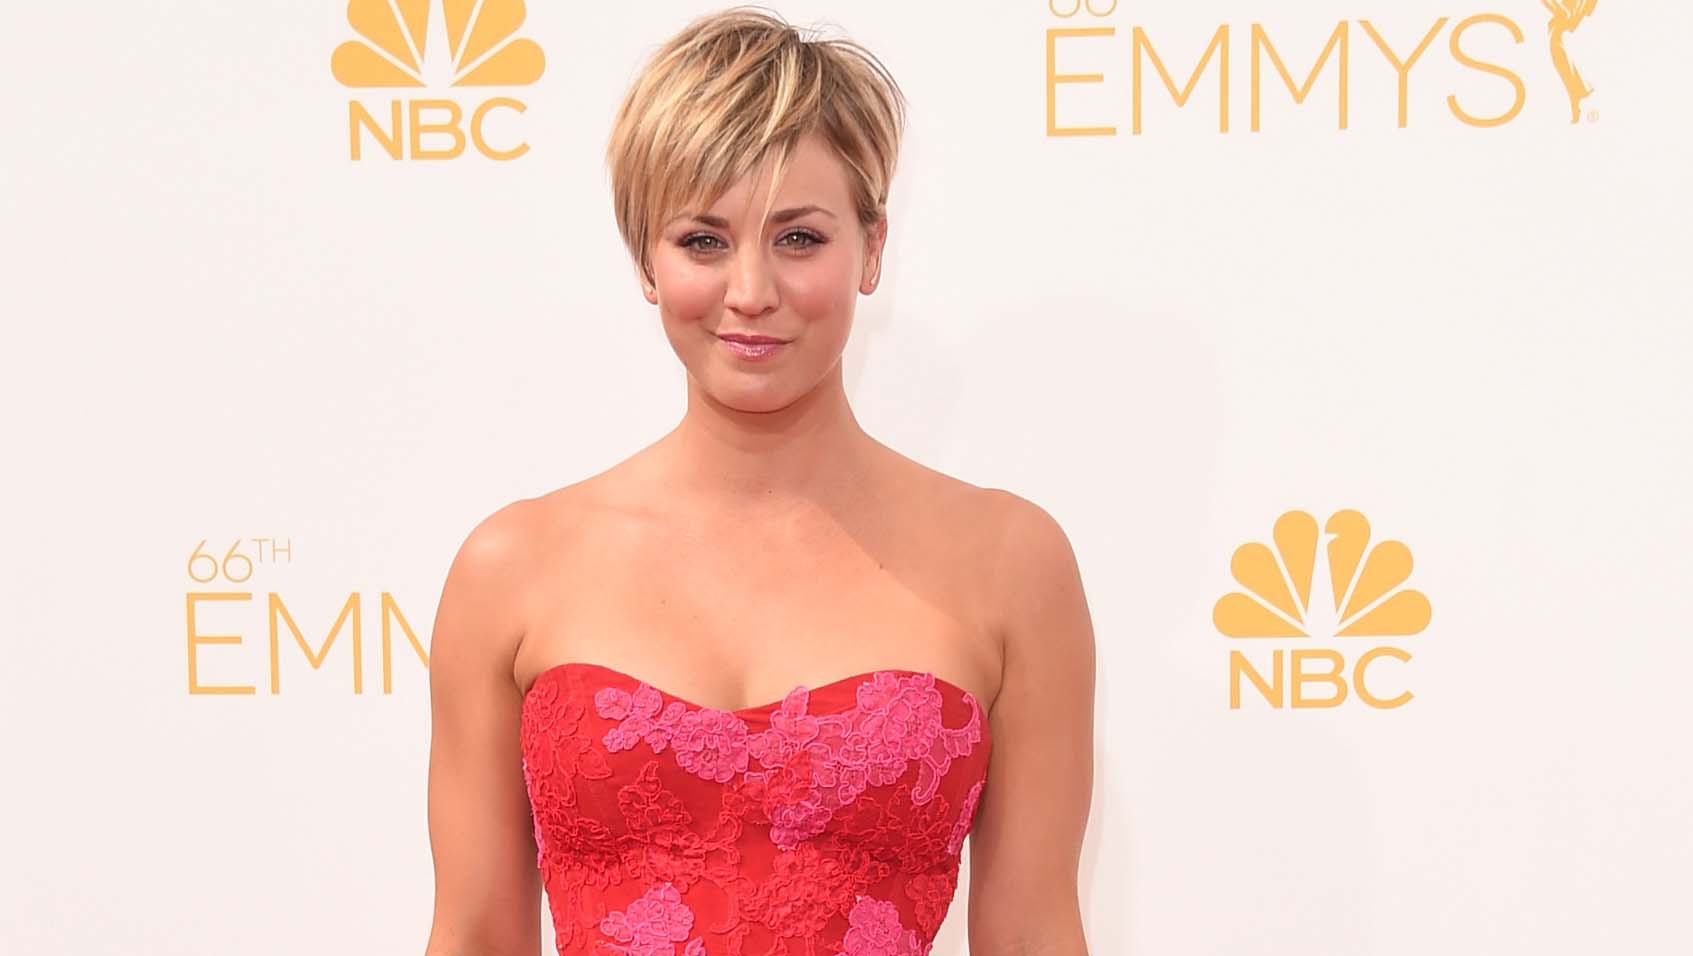 allen newsome add kaley cuoco phone number photo